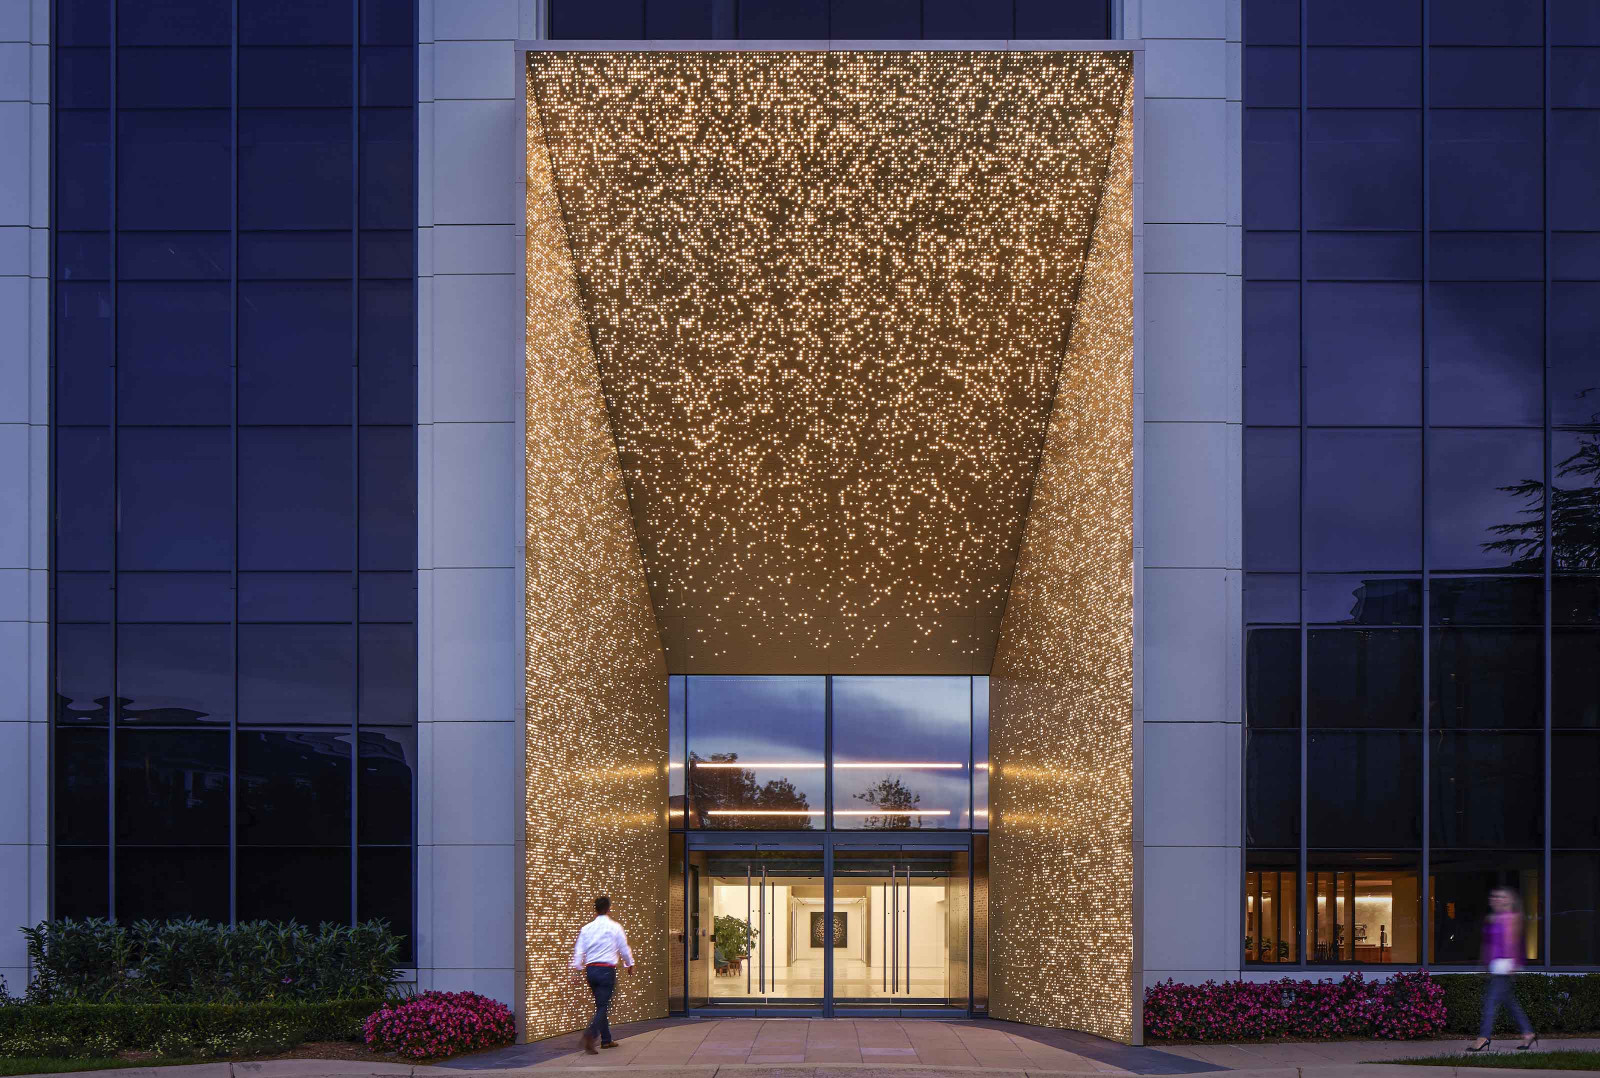 Exterior view of a commercial building with gold backlighting at its entrance. There is a person wearing a white shirt and black pants entering the building.